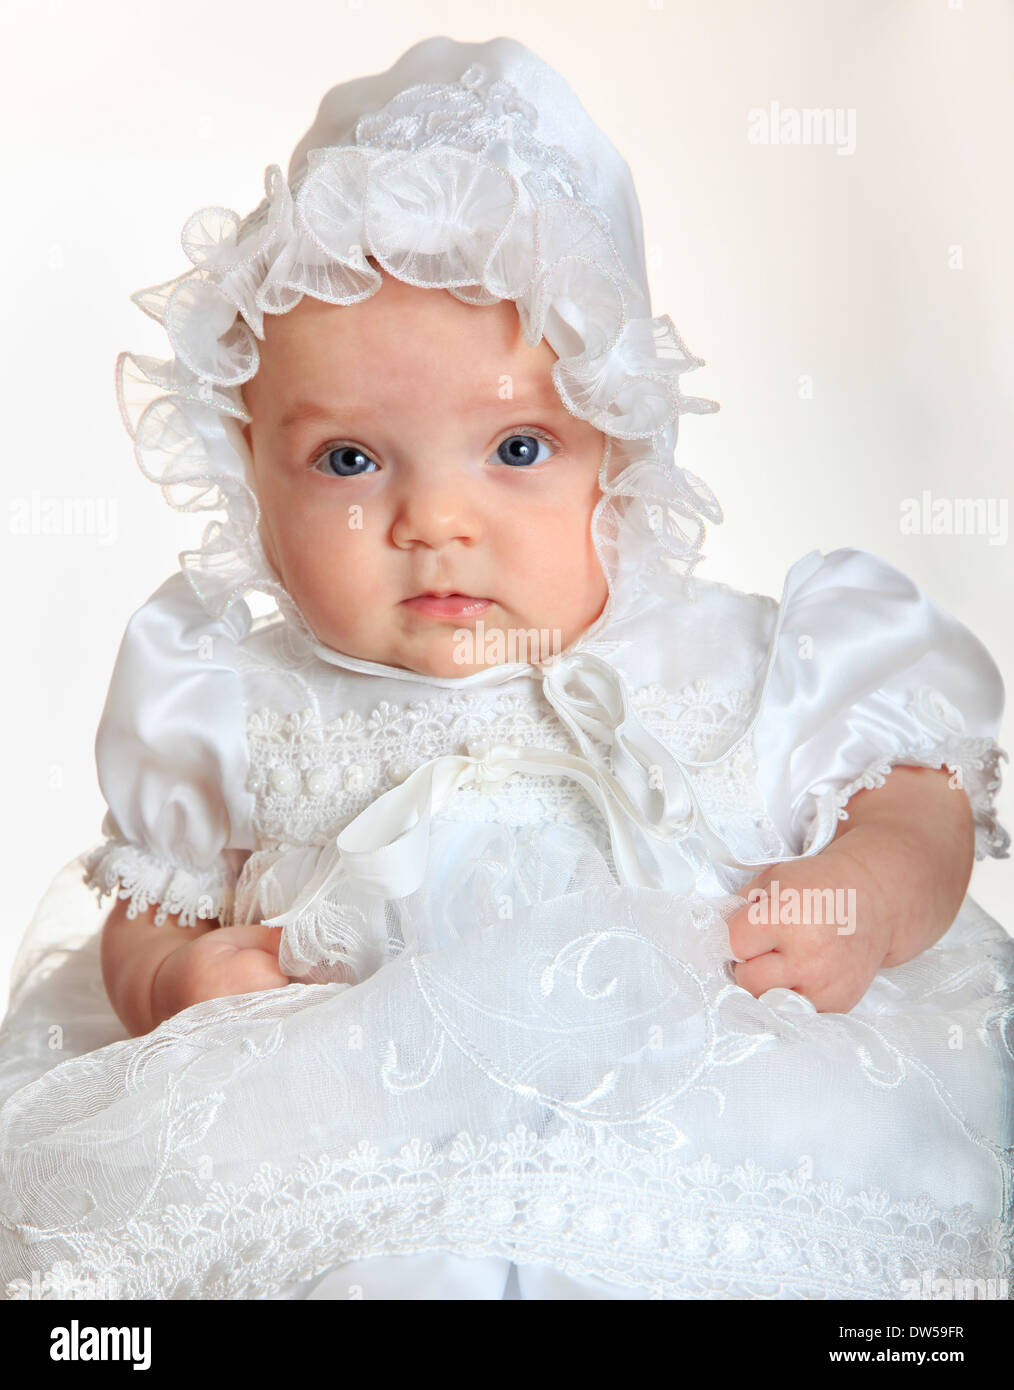 Baby girl portrait wearing a white suit and hat Stock Photo